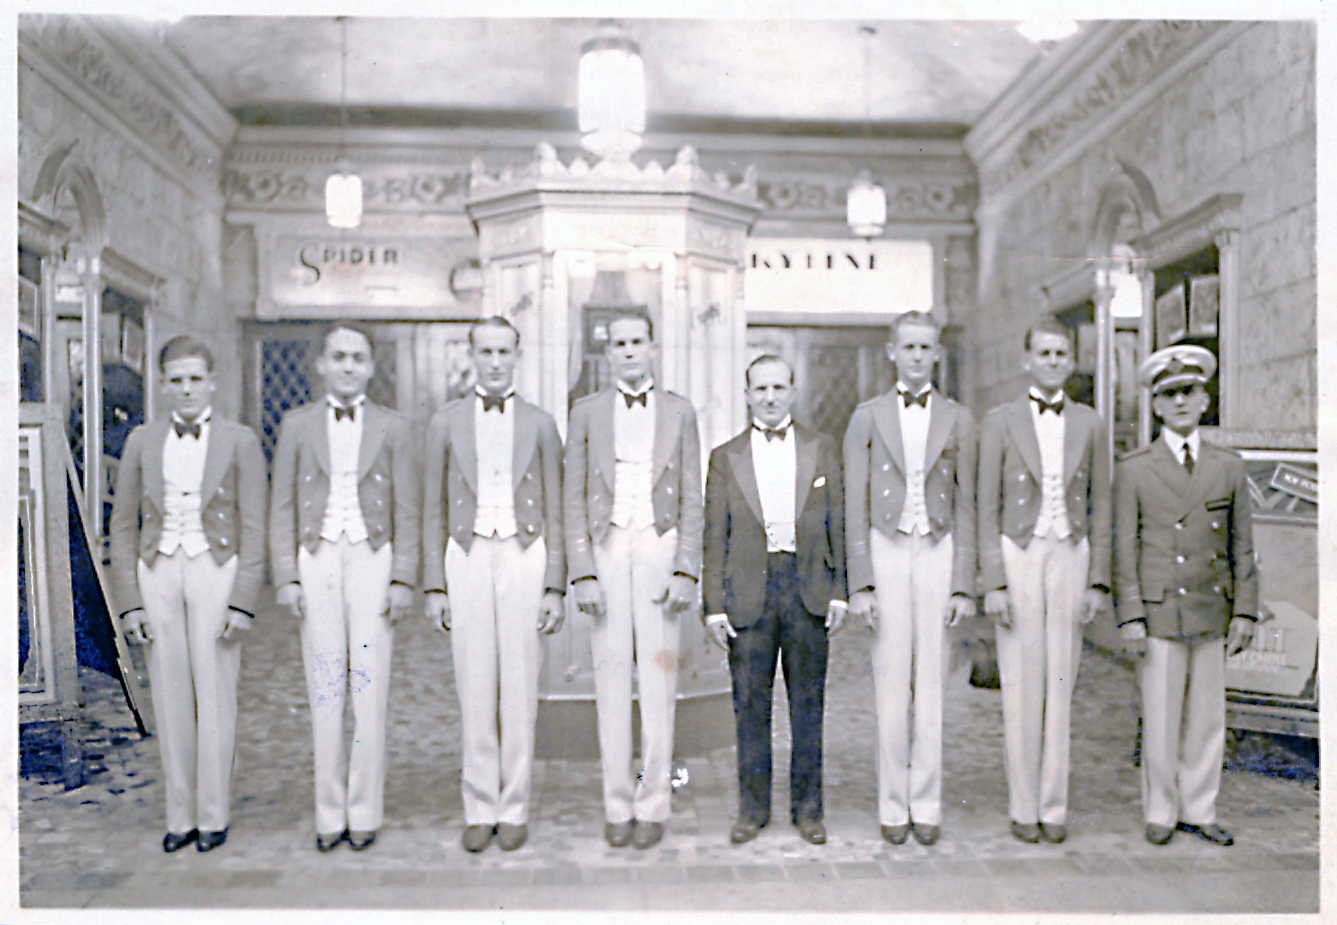 Bright (second from right) at the Capital Theater Miami 1933